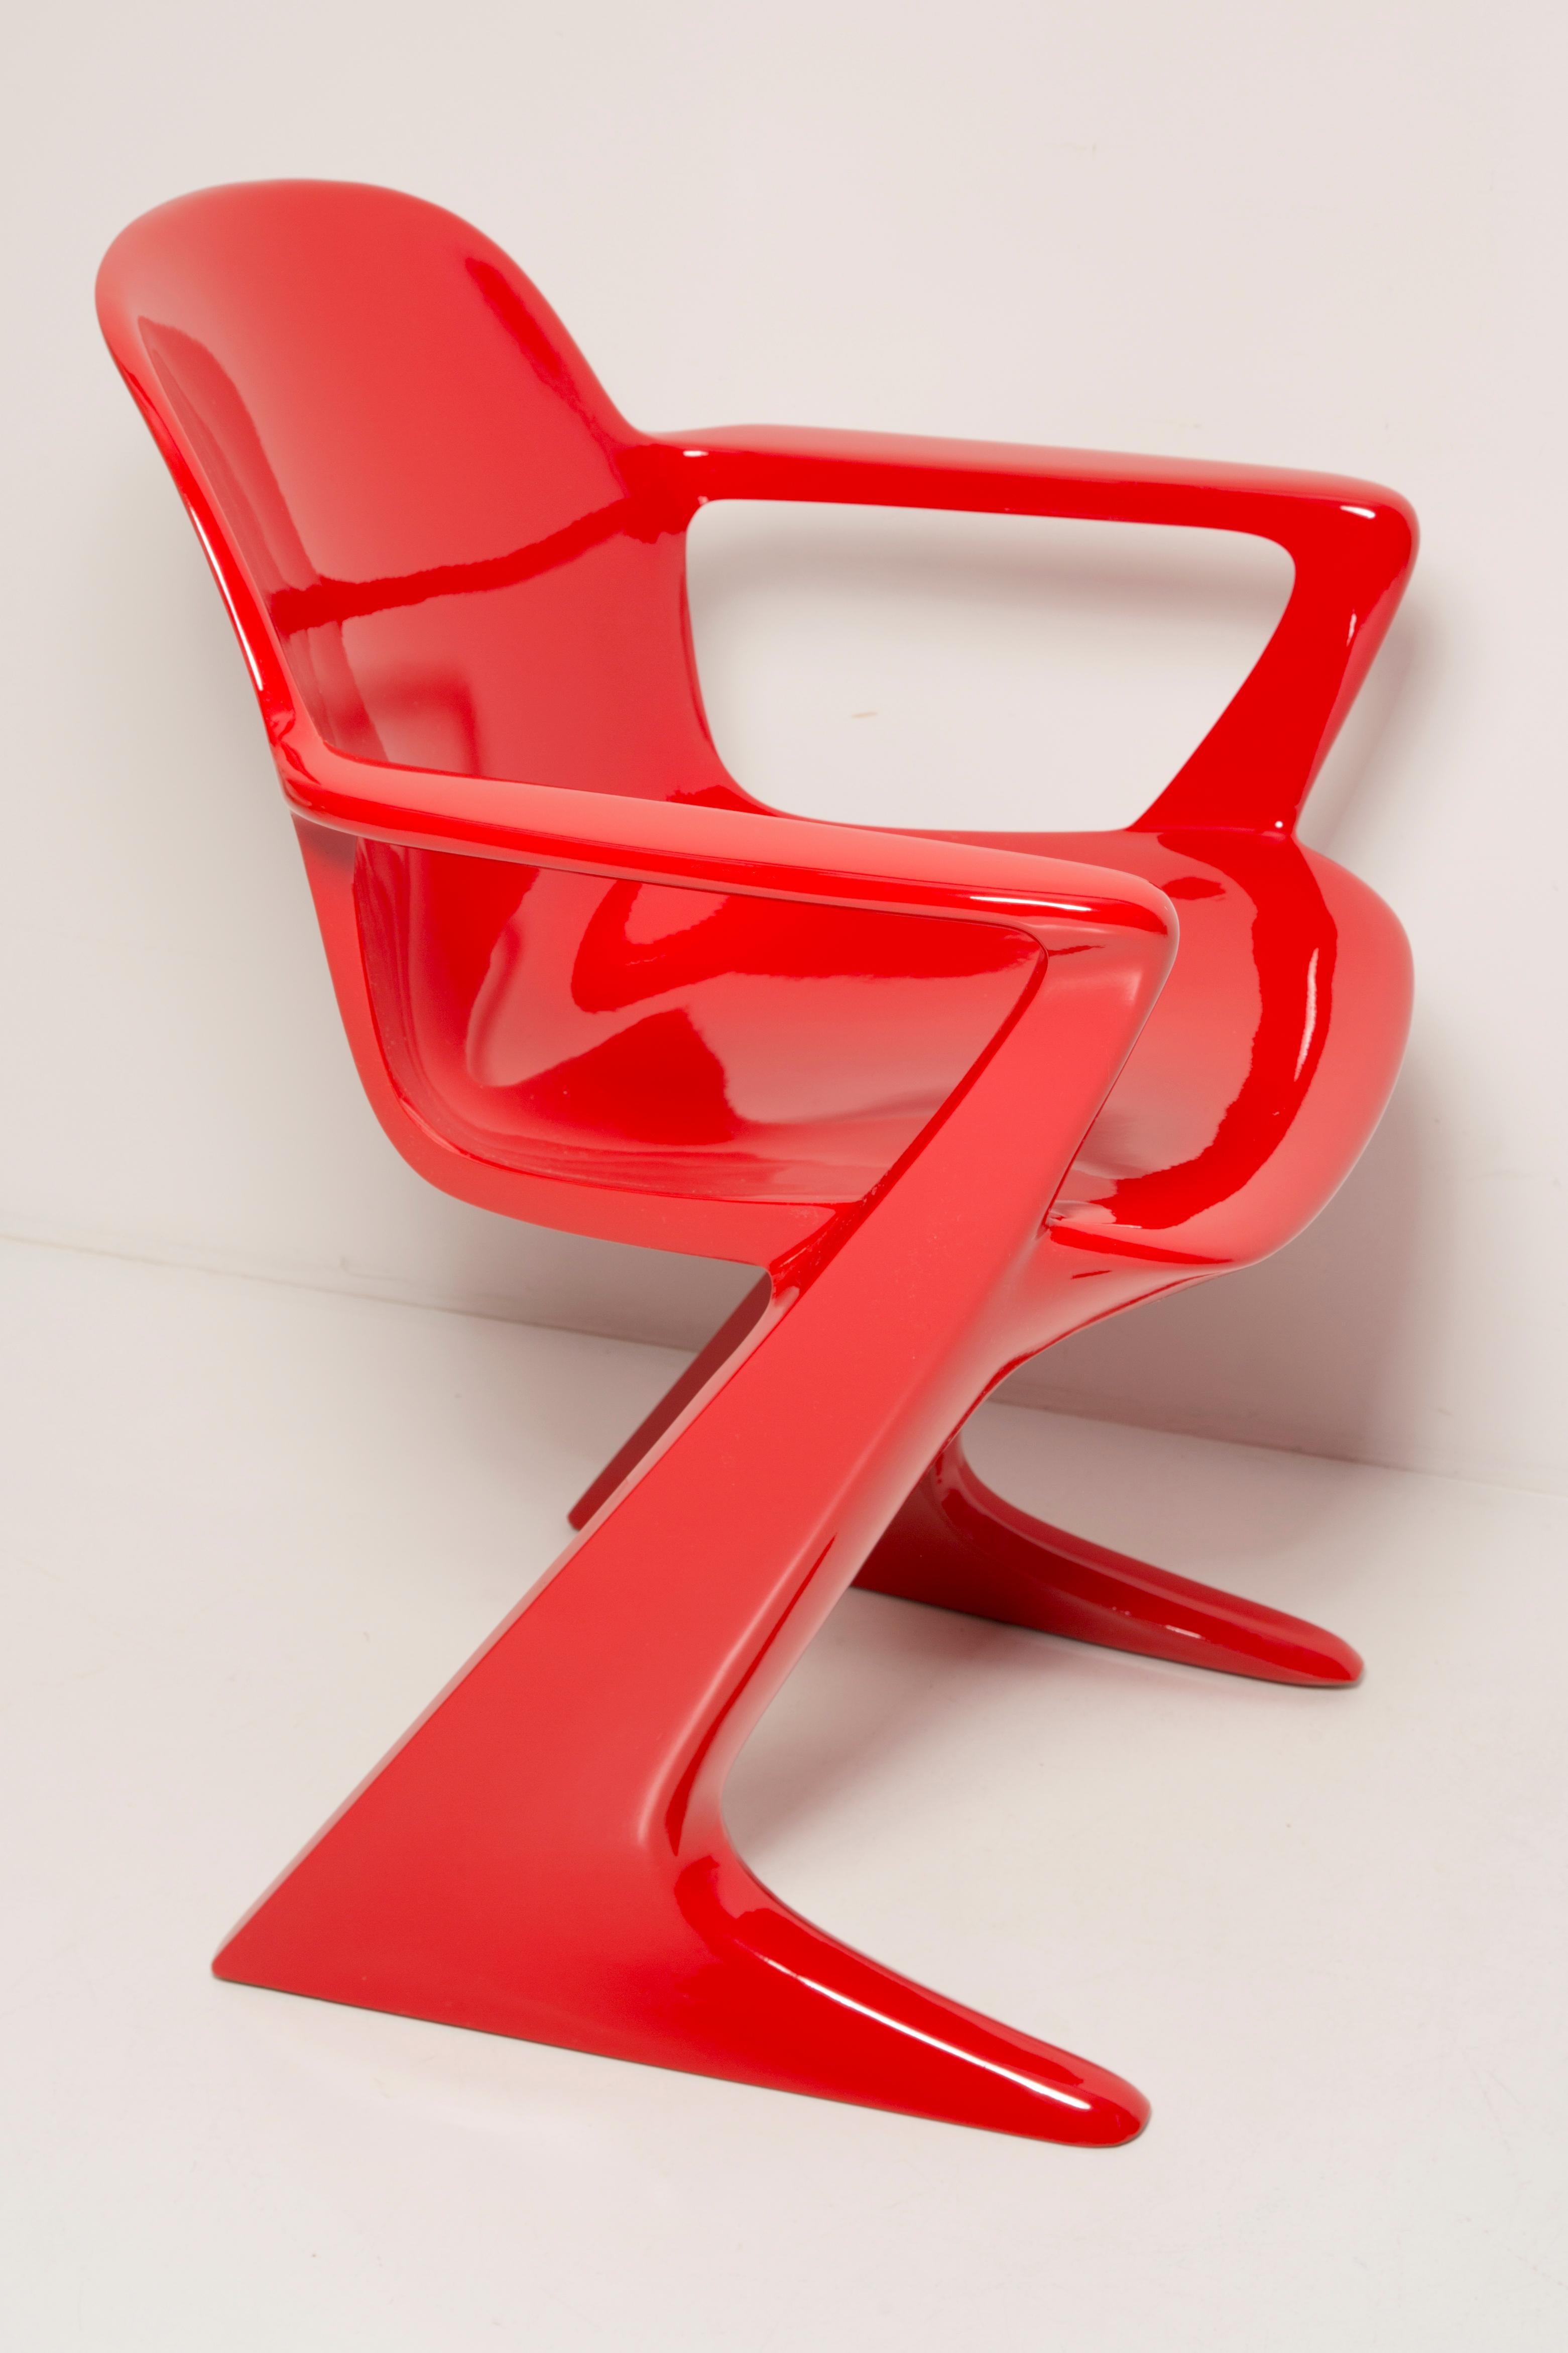 Midcentury Signal Red Kangaroo Chair Designed by Ernst Moeckl, Germany, 1968 For Sale 1